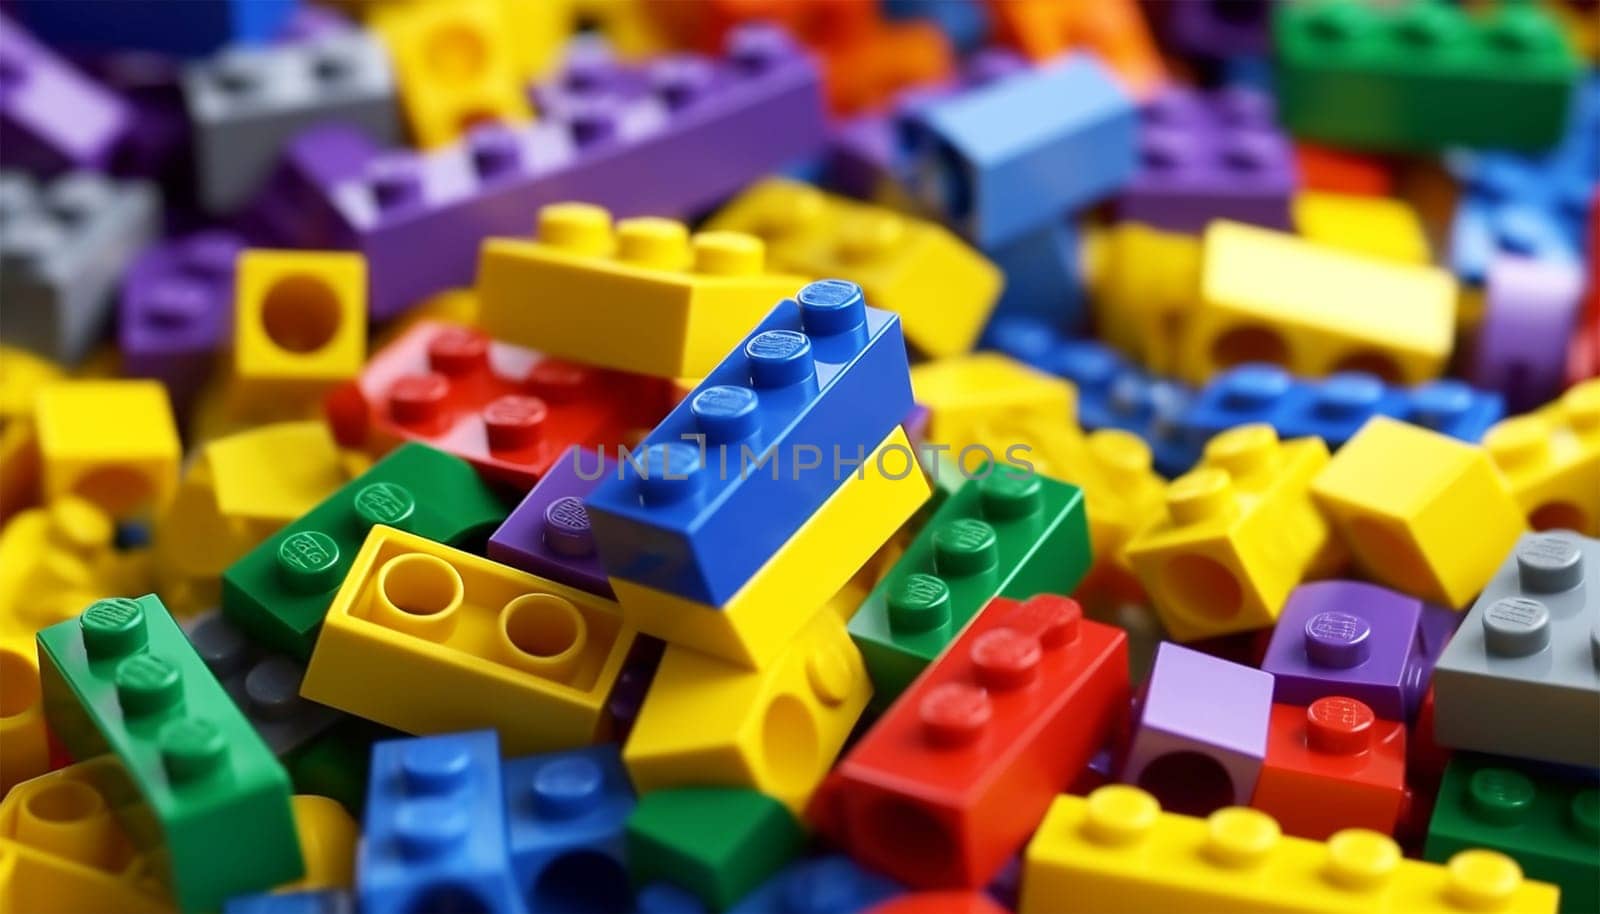 Set of brick block building toys 3d isometric illustration for children. Colorful bricks toy. Part and piece for decorative design and creative game. Copy space colorful background plastic